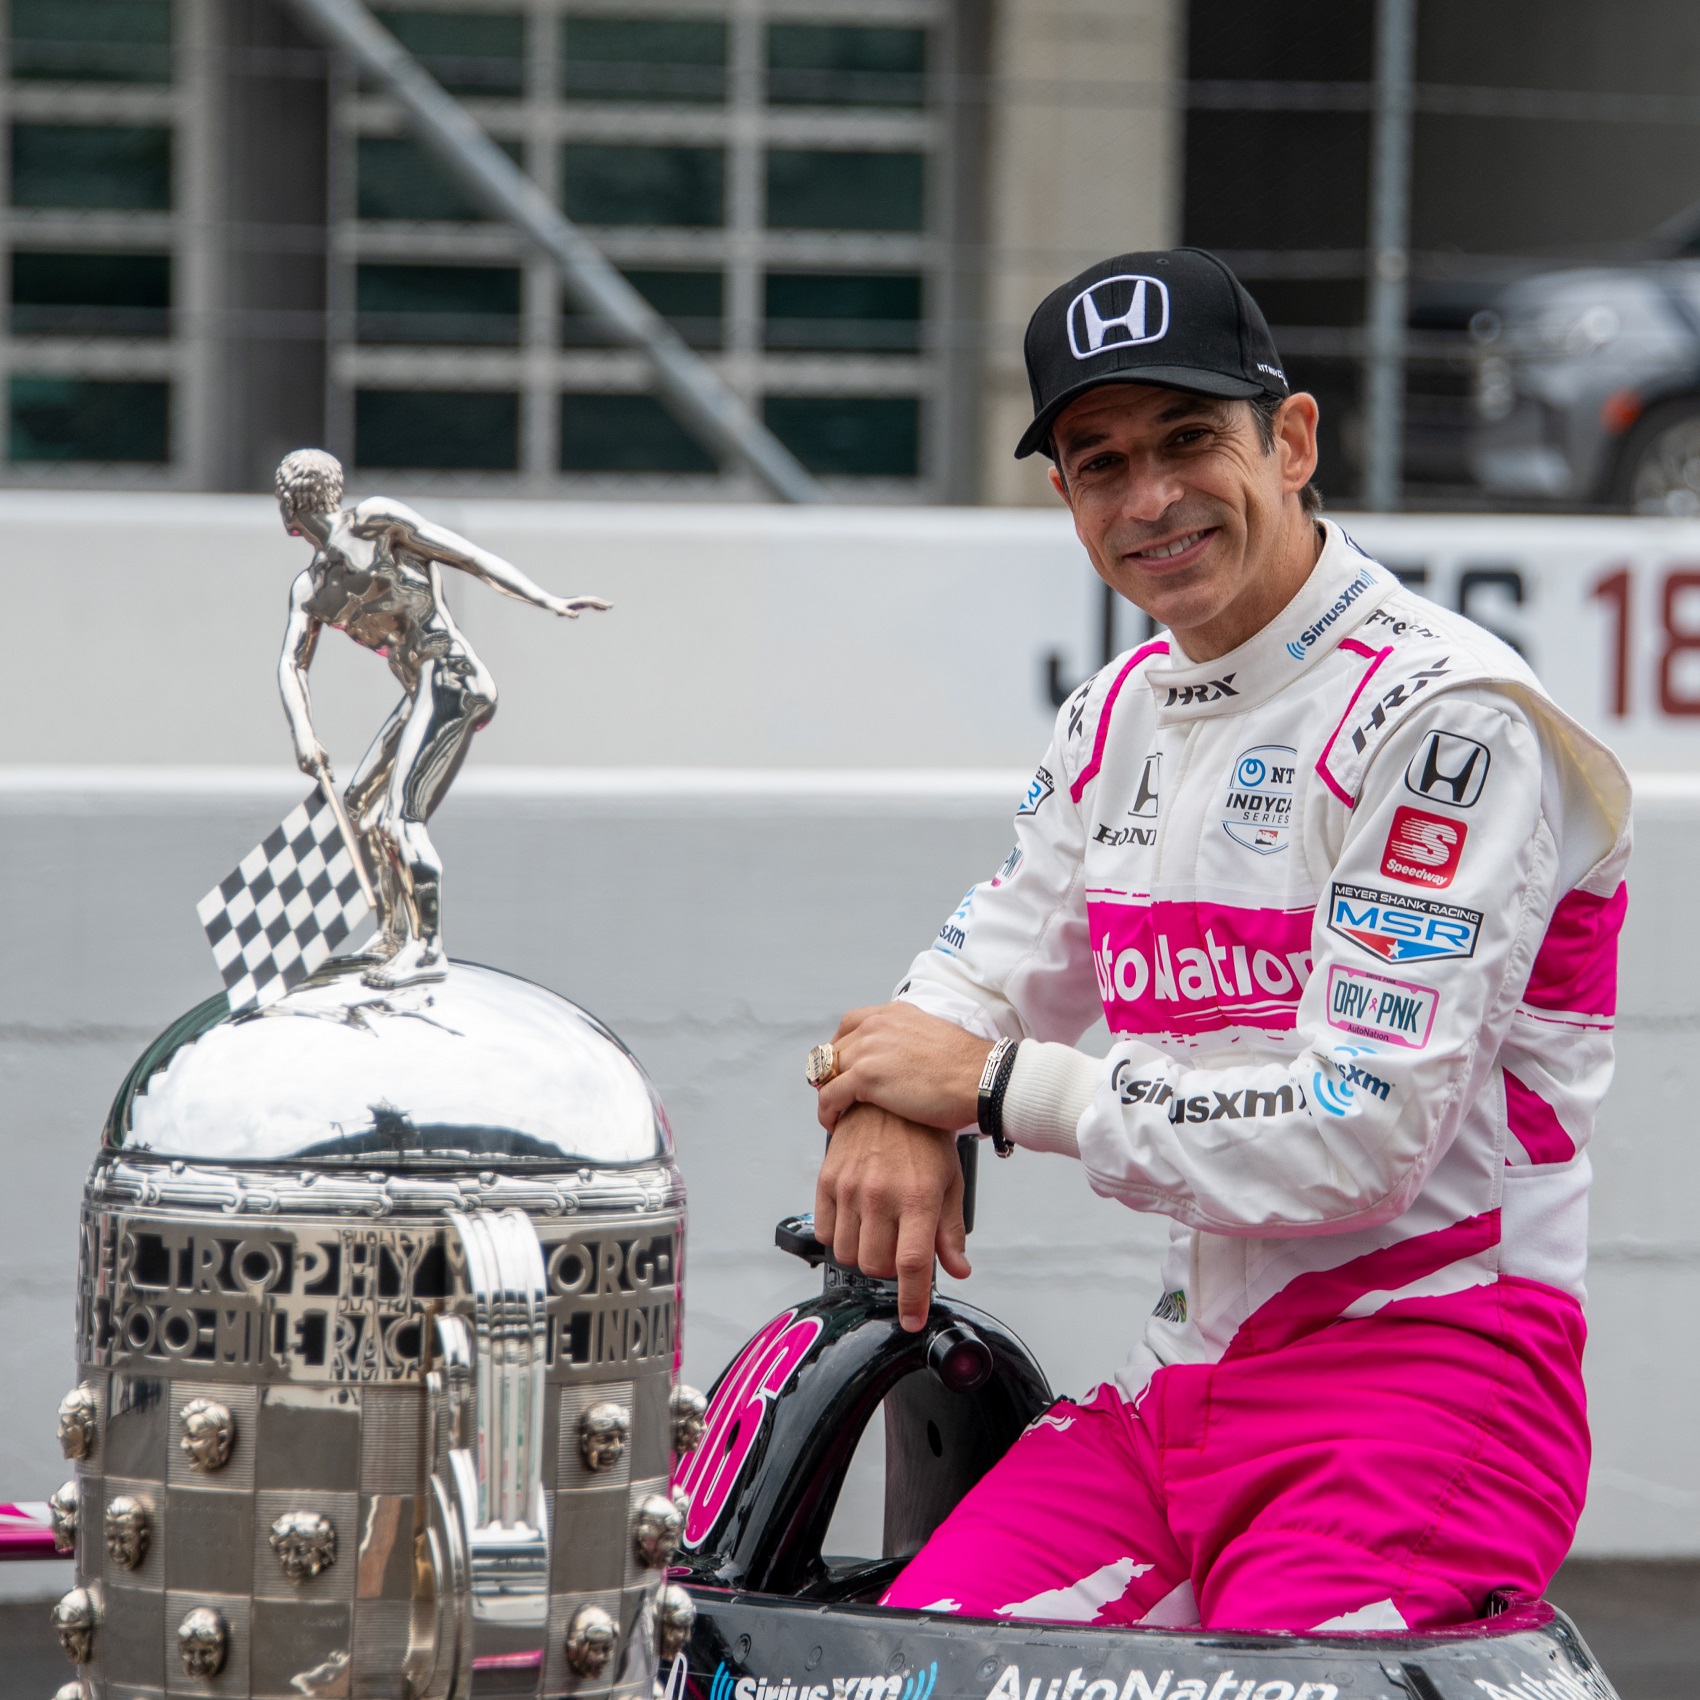 Helio Castroneves, Meyer Shank Racing, Indy 500, IndyCar